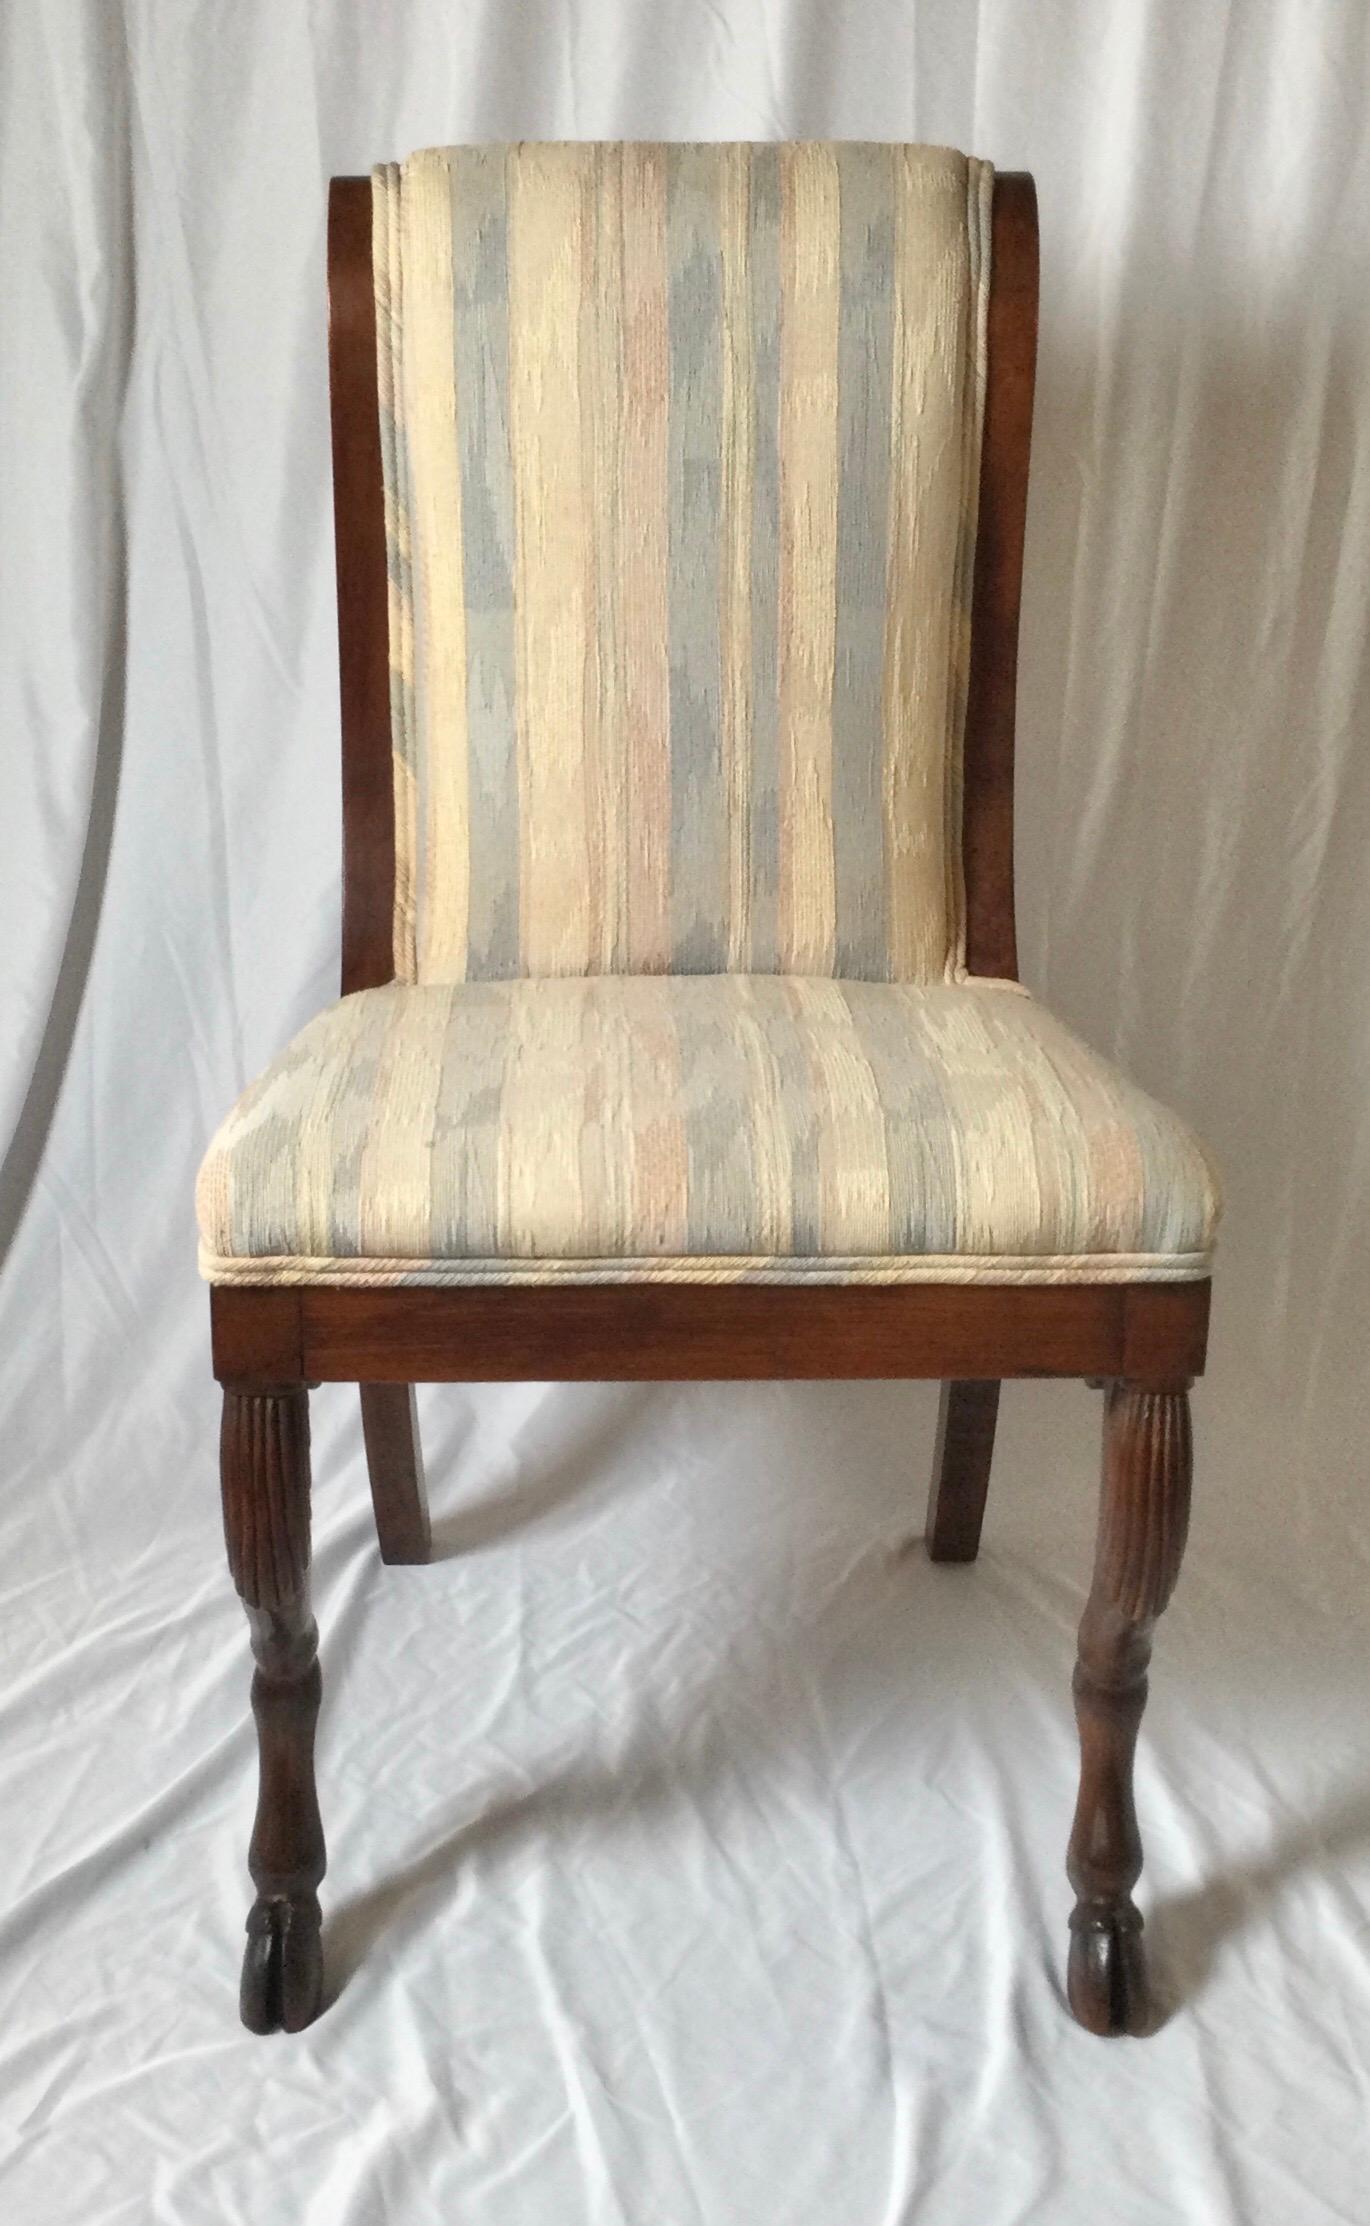 Regency era side chair with goat hoof front legs. Newer upholstery with rosewood. 18